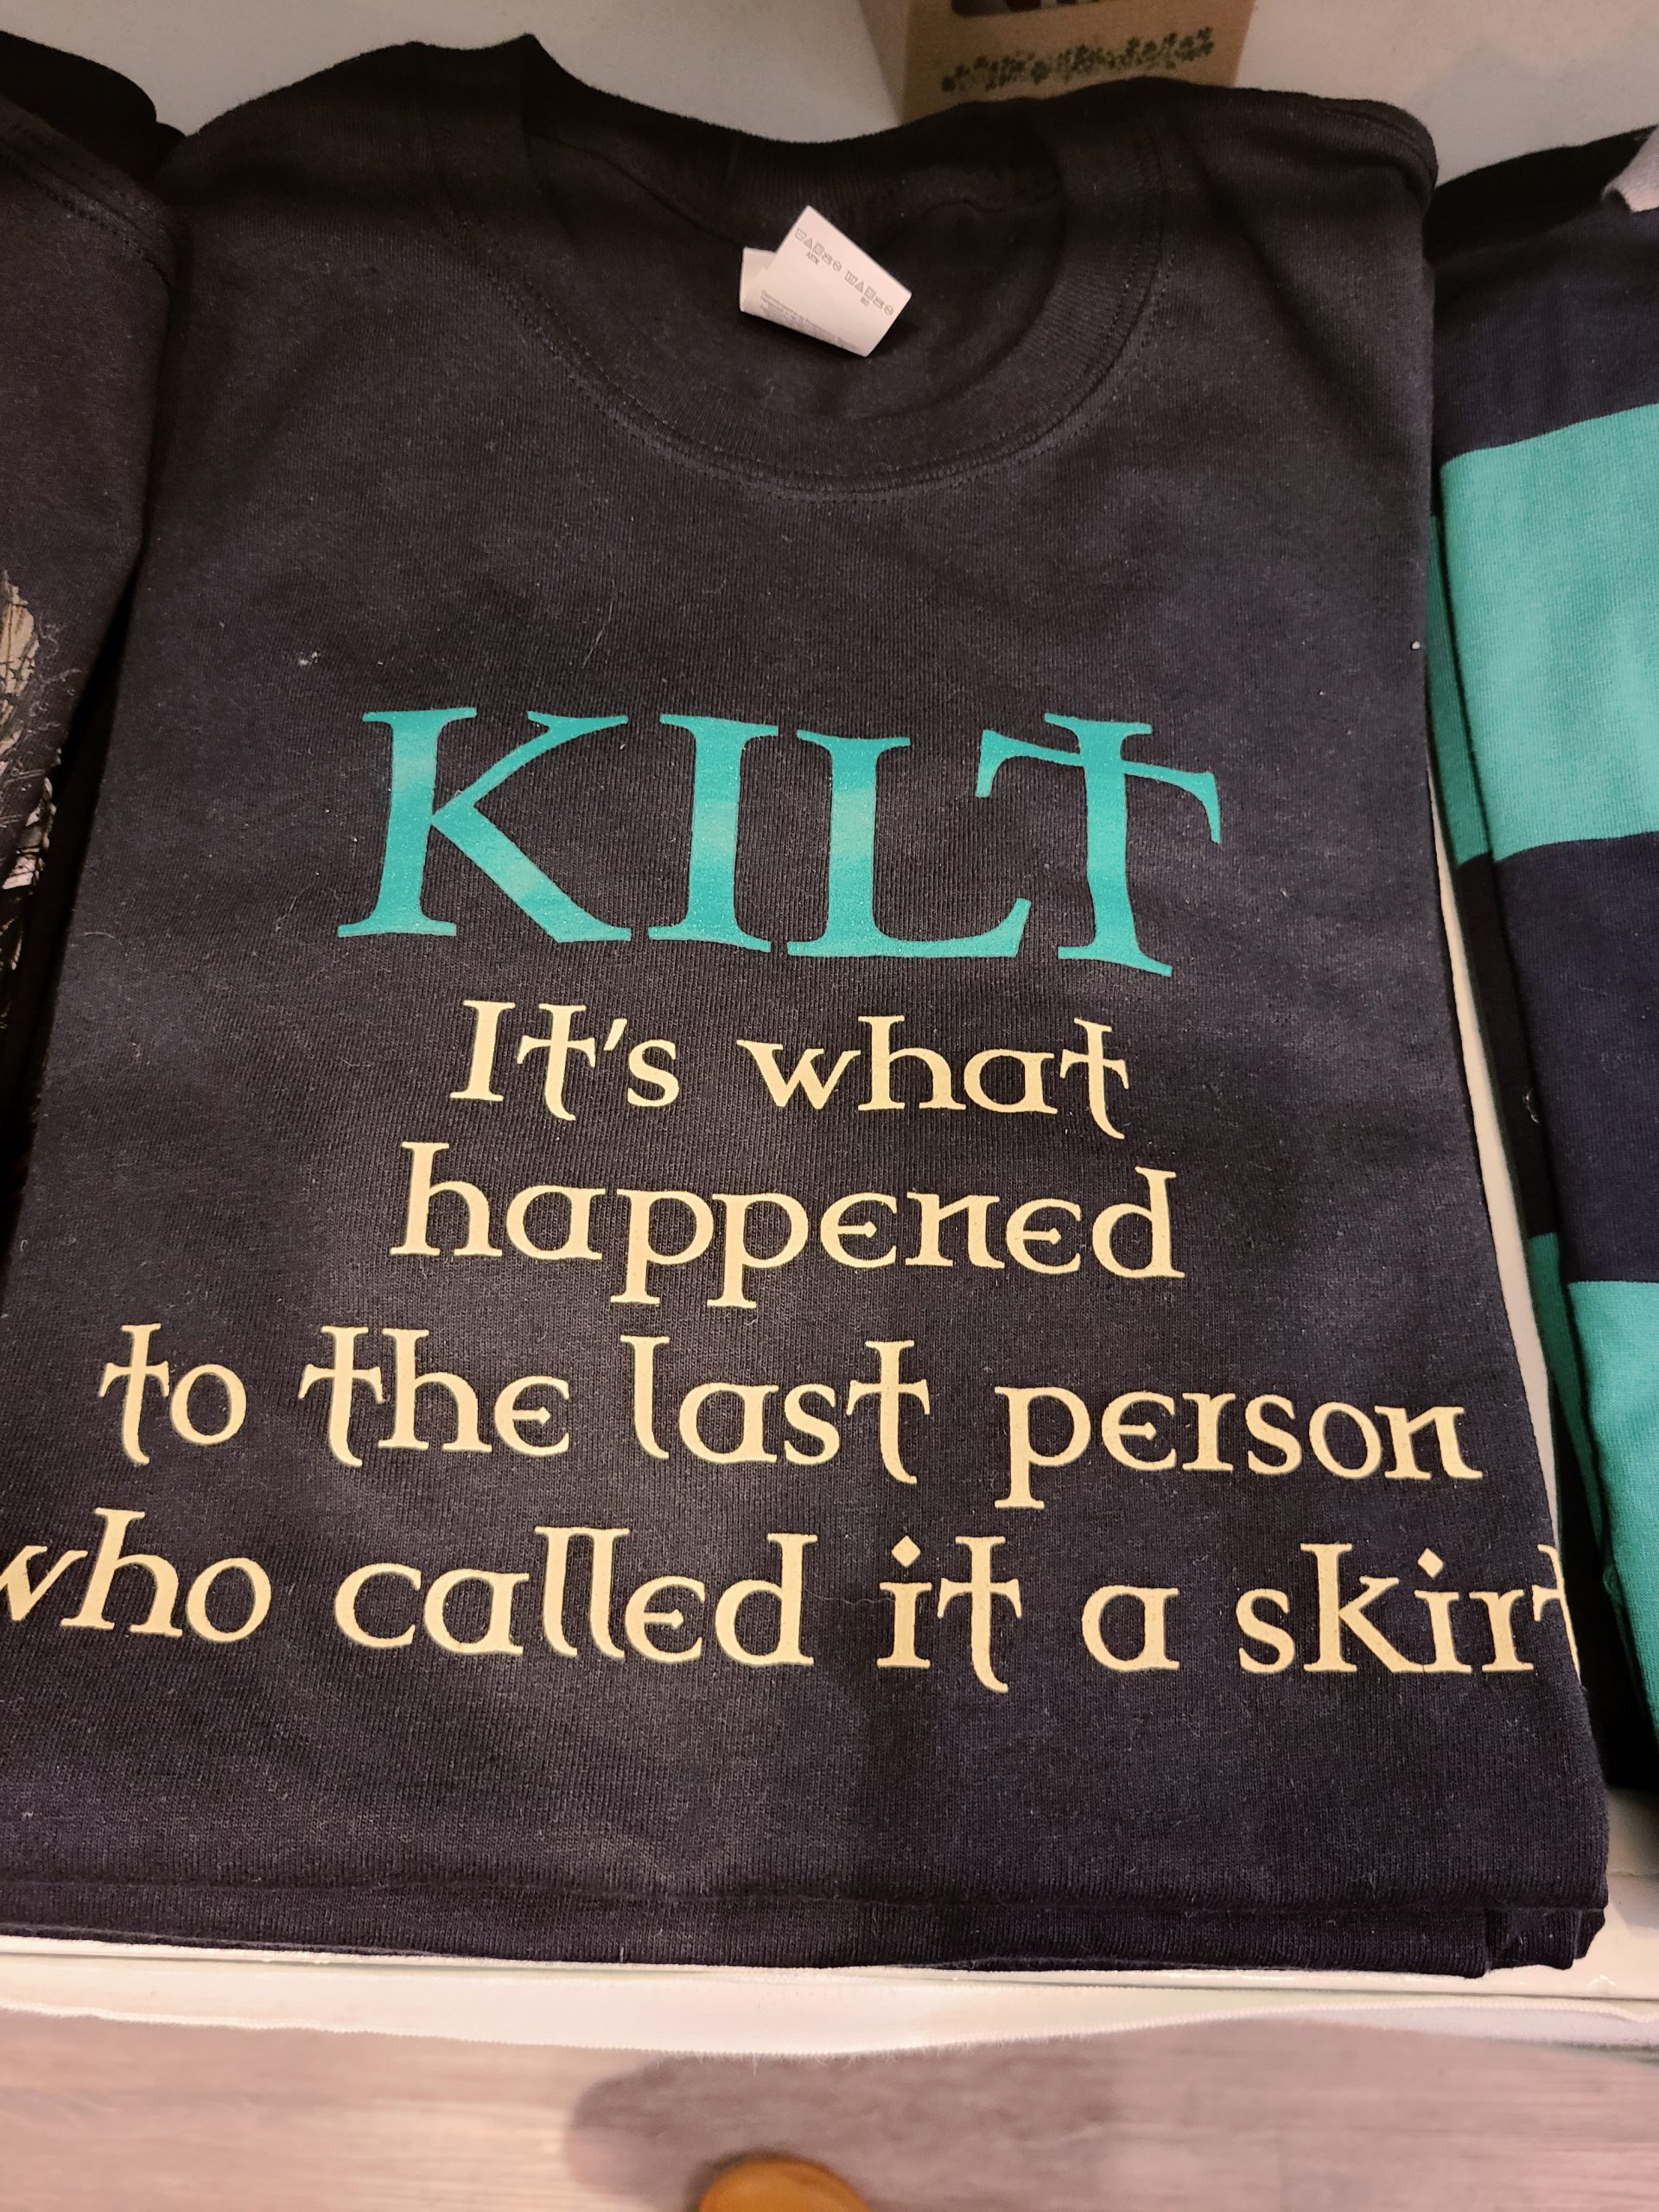 A t-shirt that says: Kilt, It's what happened to the last person who called it a skirt"